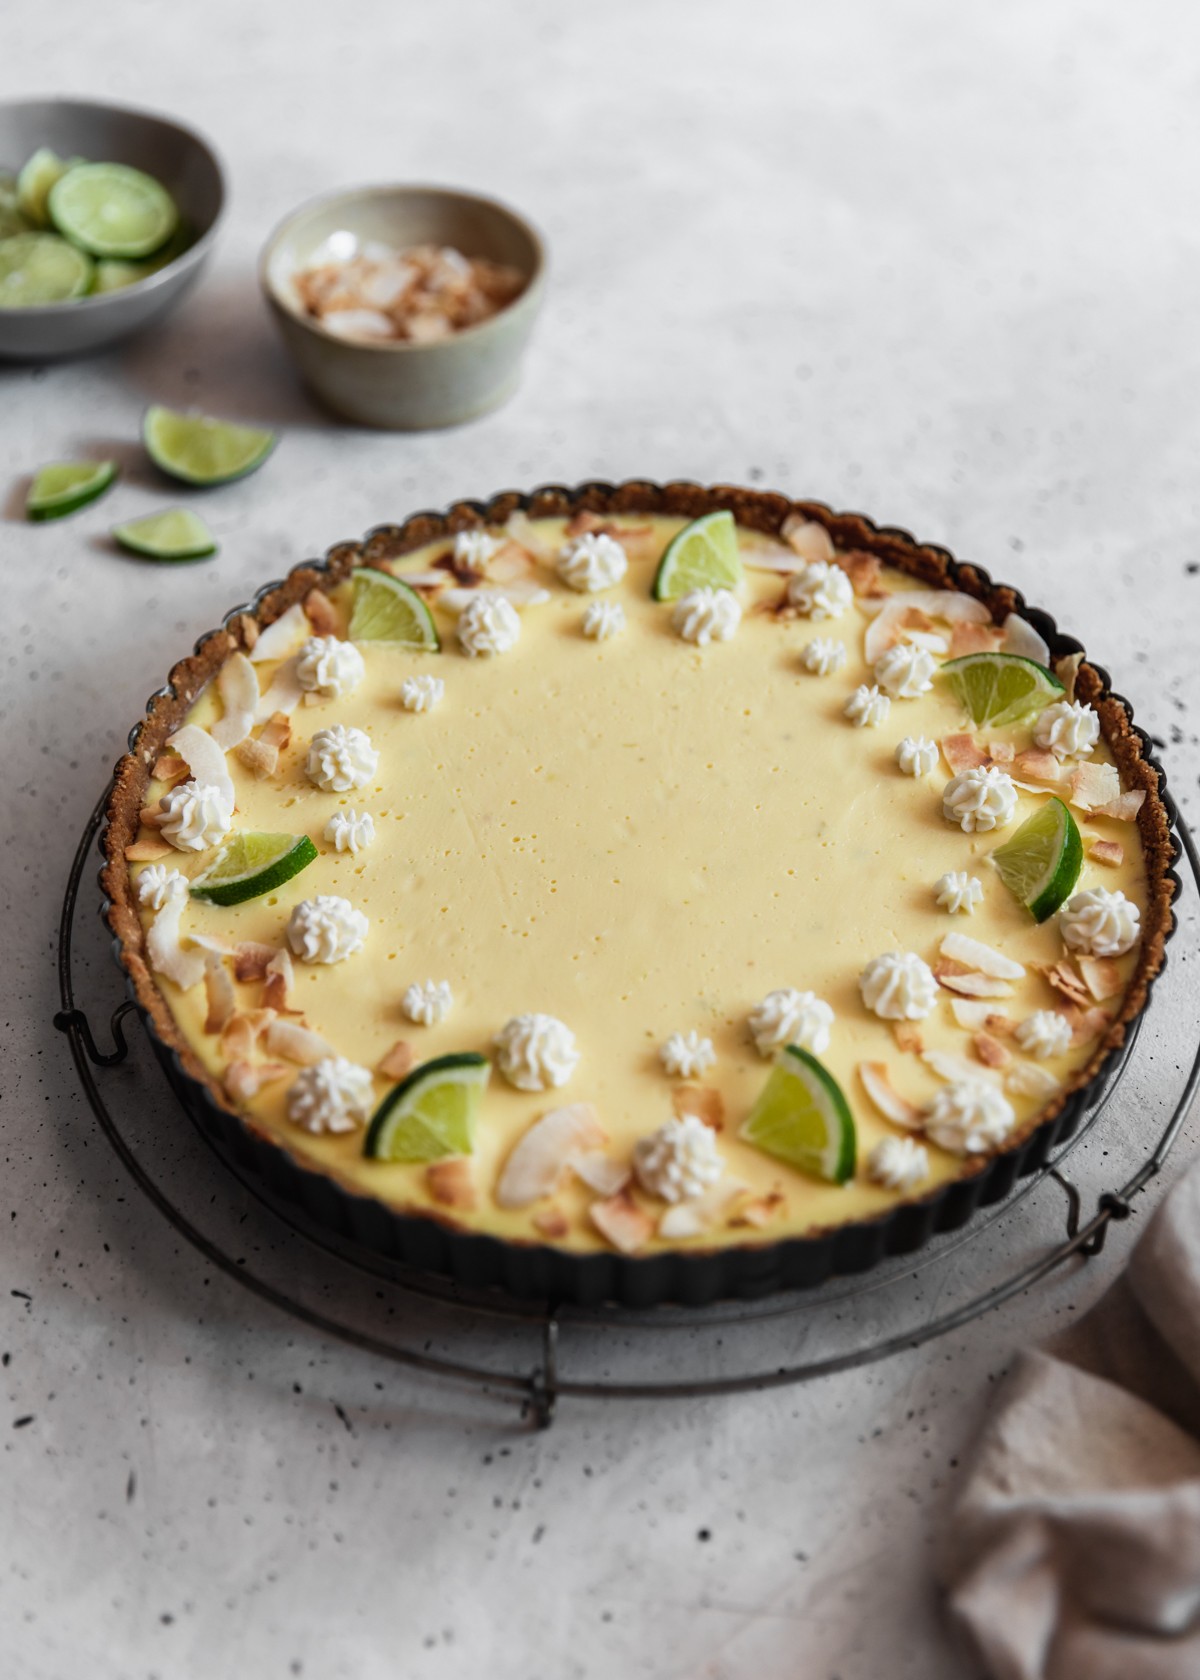 A side image of a coconut key lime pie on a cooling rack placed on a grey table next to a bowl of coconut flakes, bowl of limes, and grey linen.